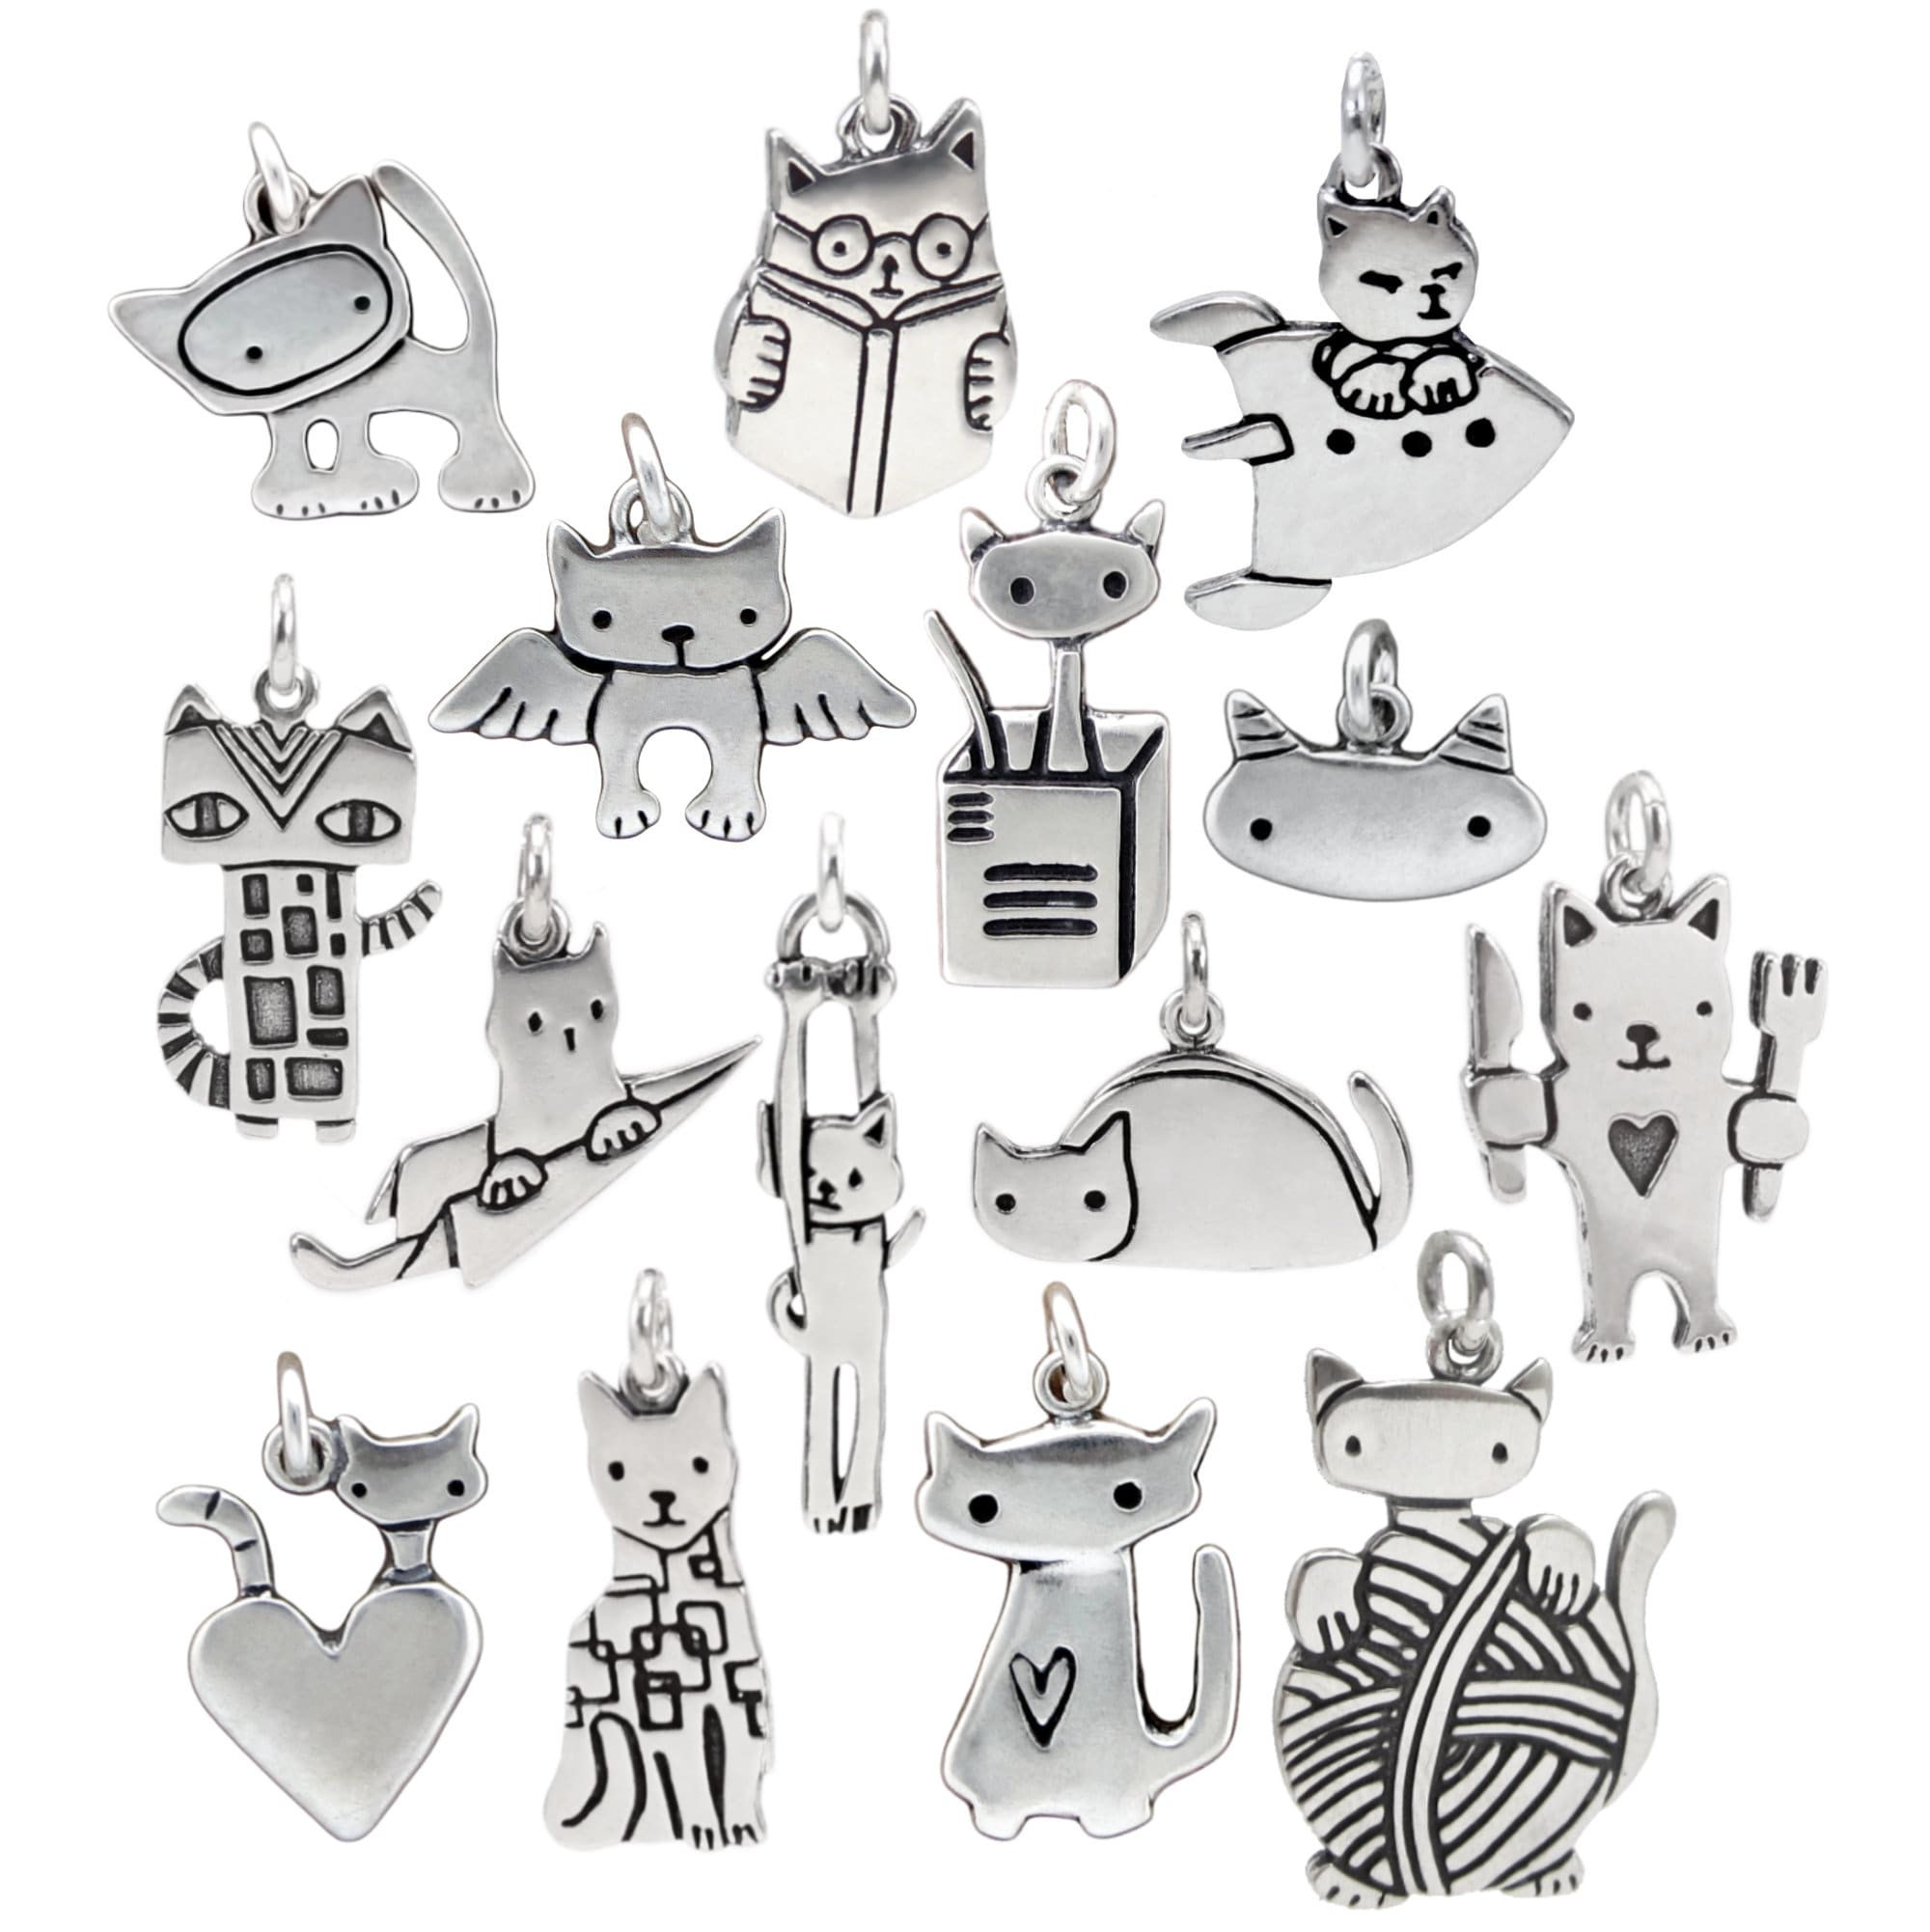 Cat Charm - Choose Your Own Charm - Extra Charm for Charm Bracelet - Sterling Silver Cute Kitty Charm Add On